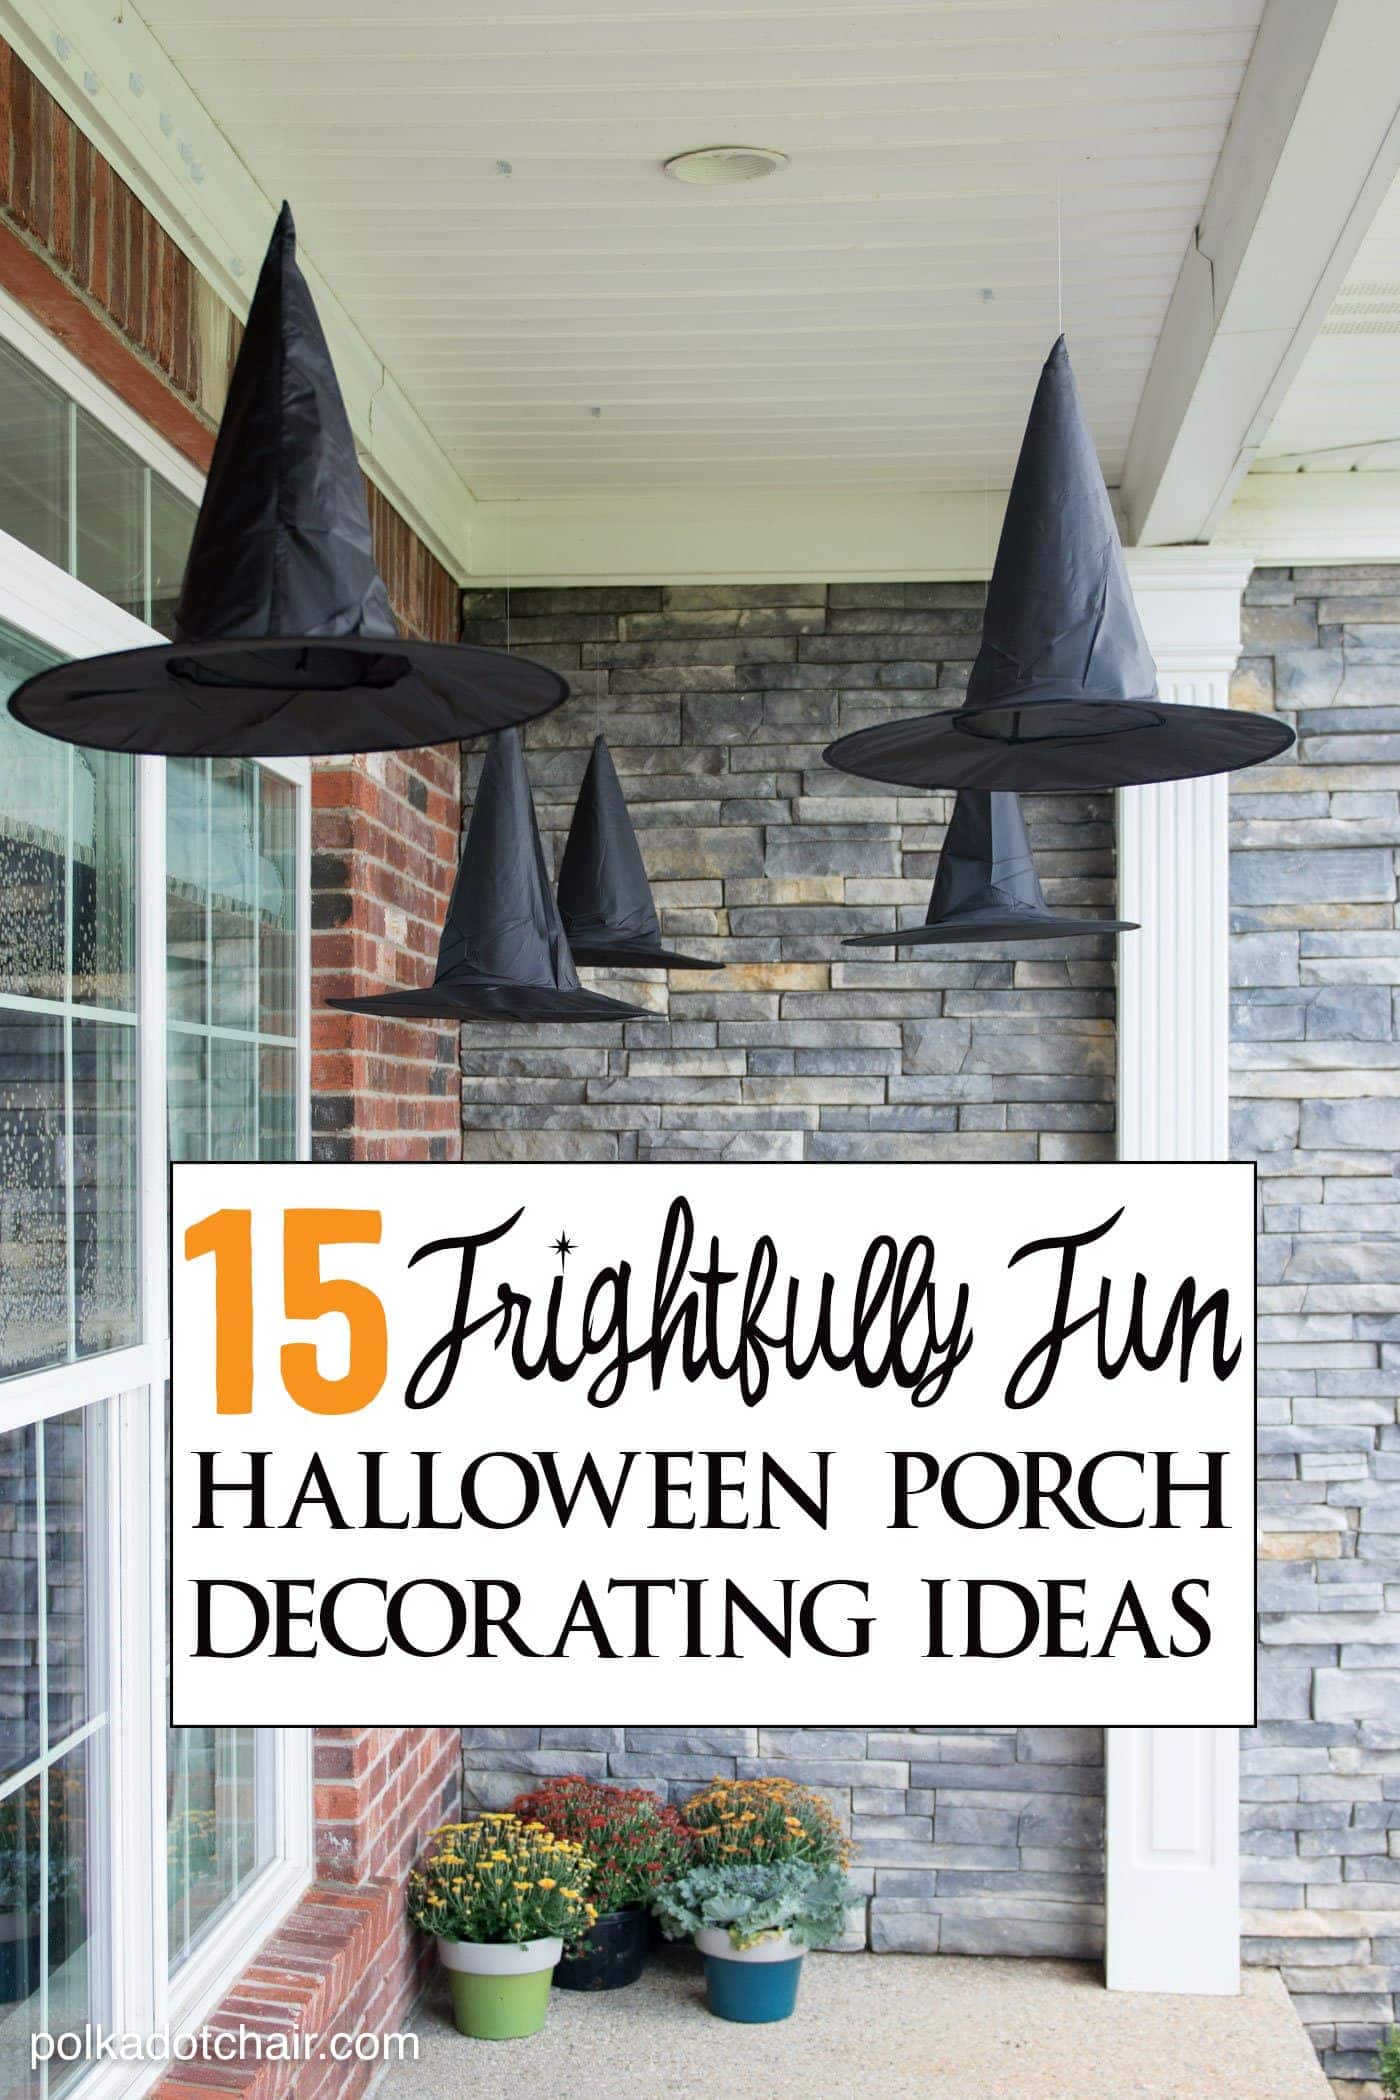 15 Frightfully Fun Ways to Decorate a Porch for Halloween